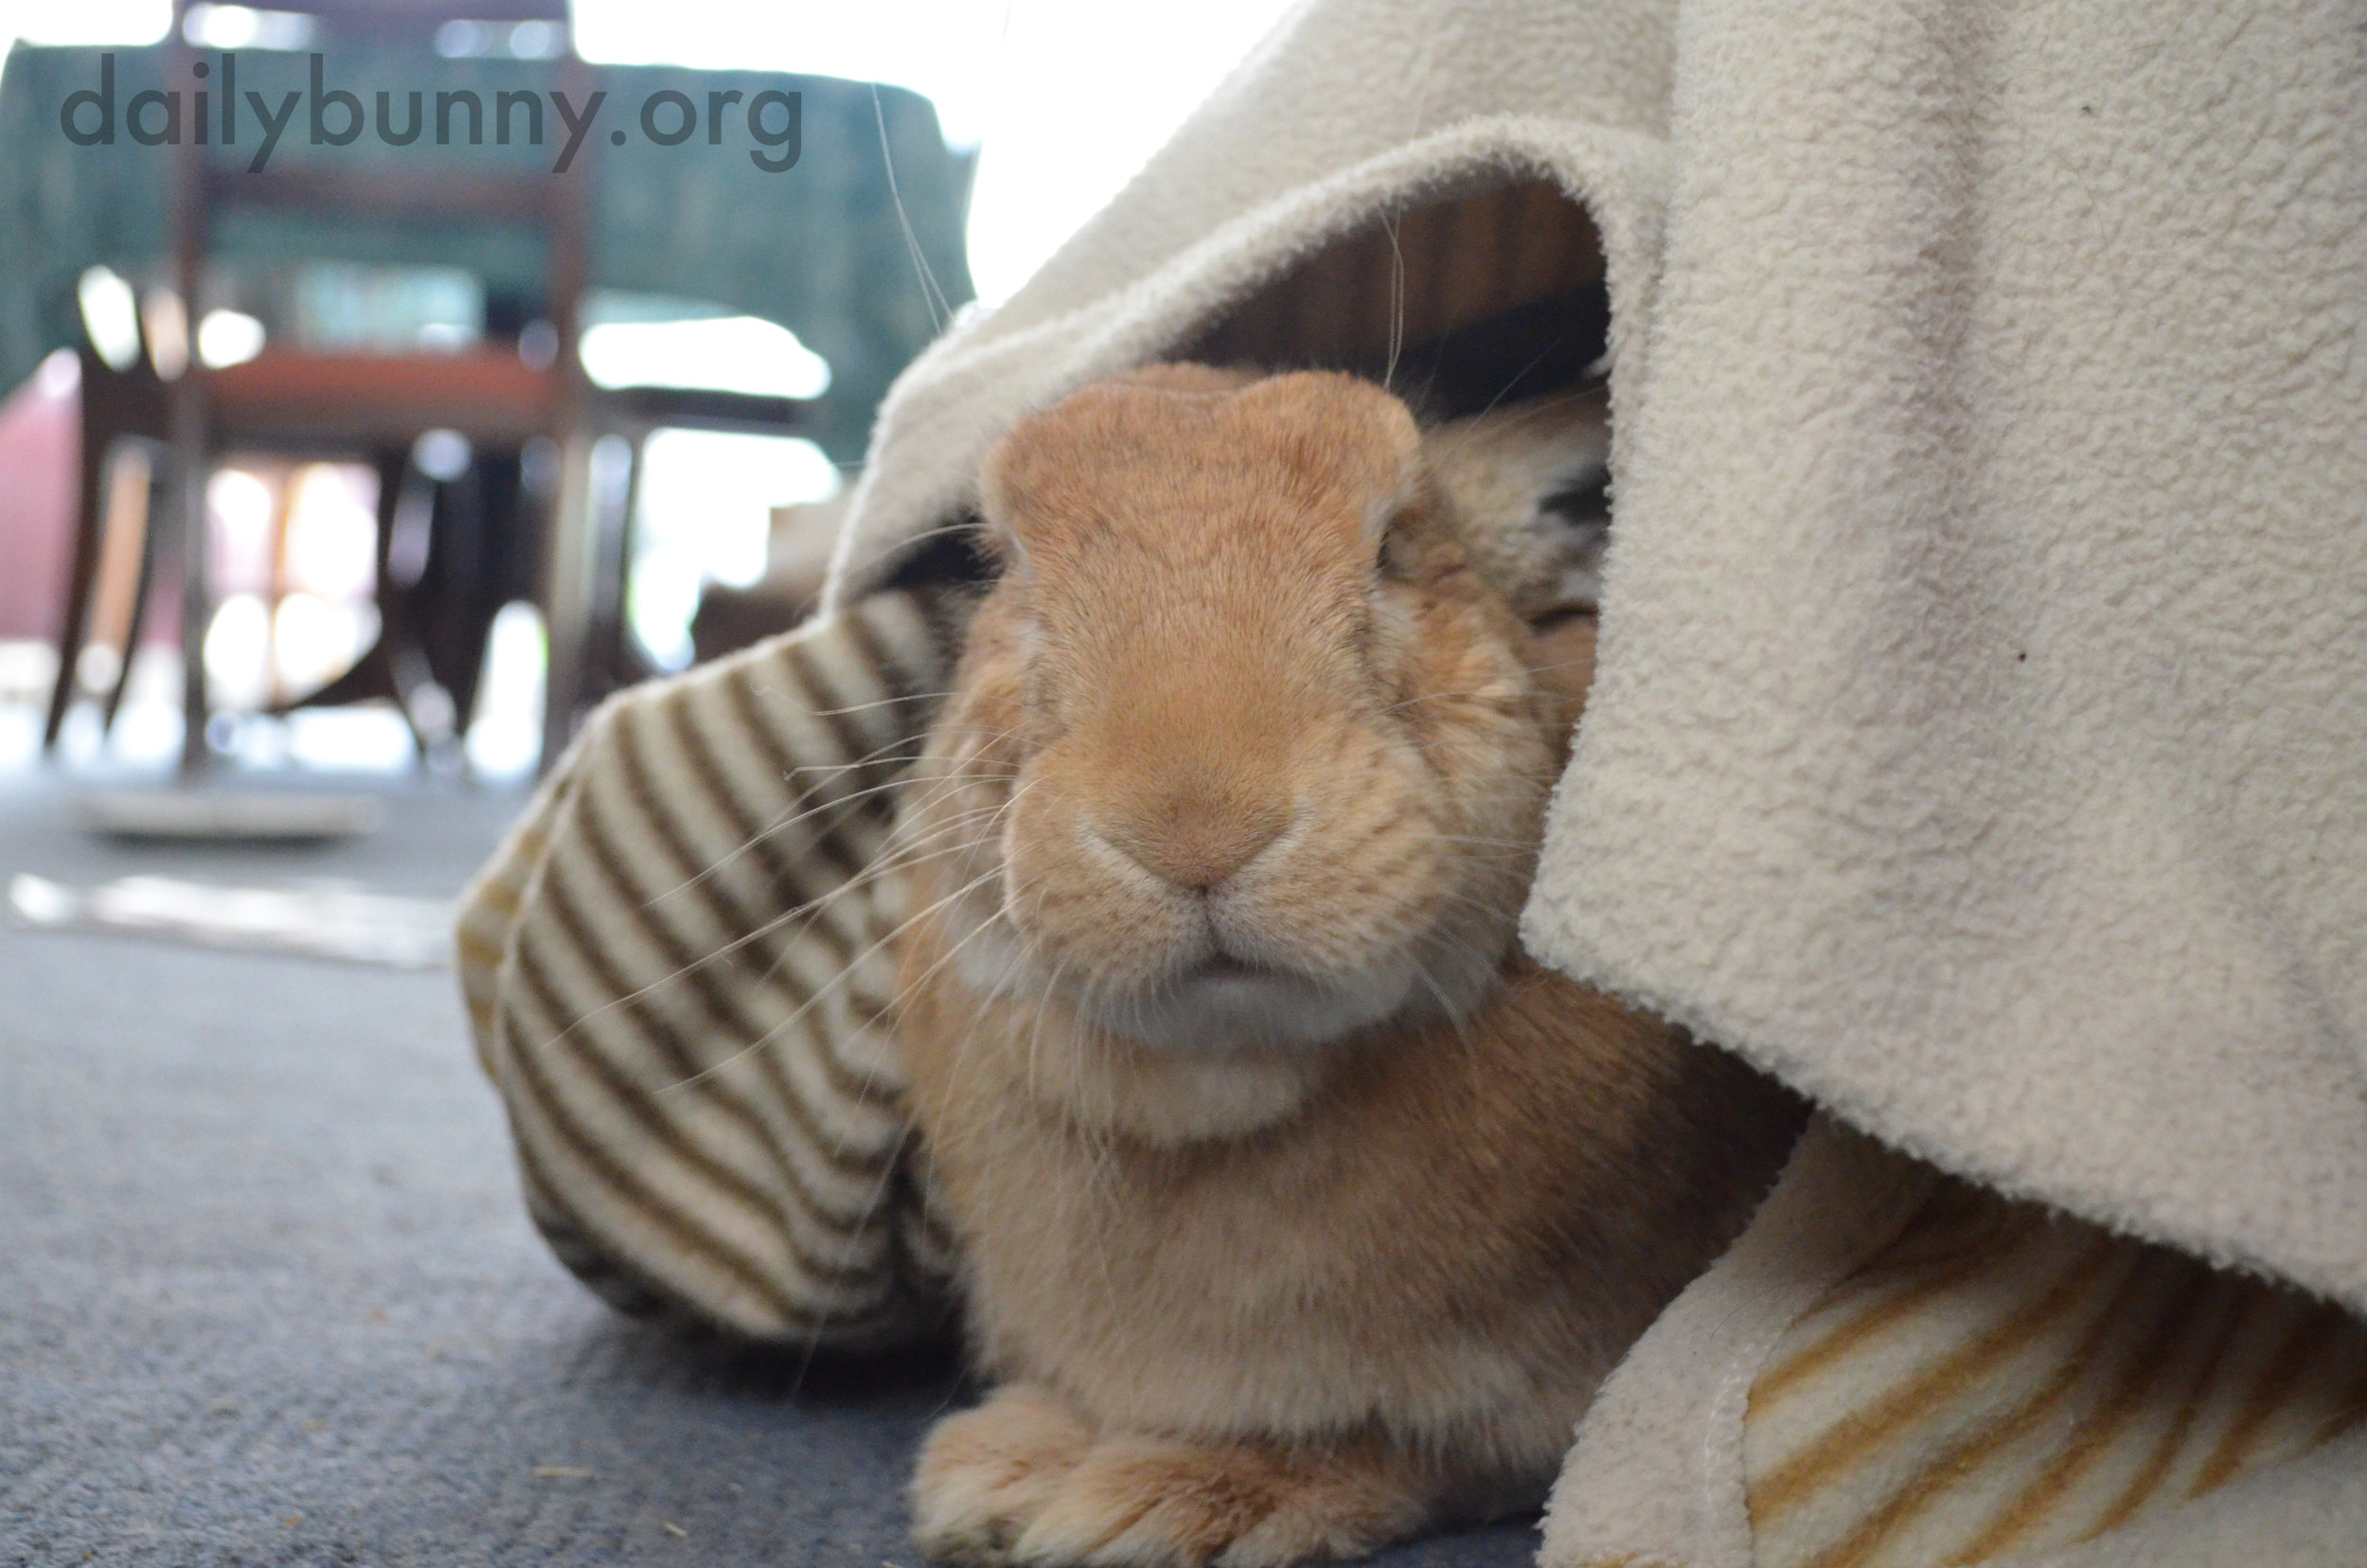 Who Disturbs Bunny in His Blanket Fort?